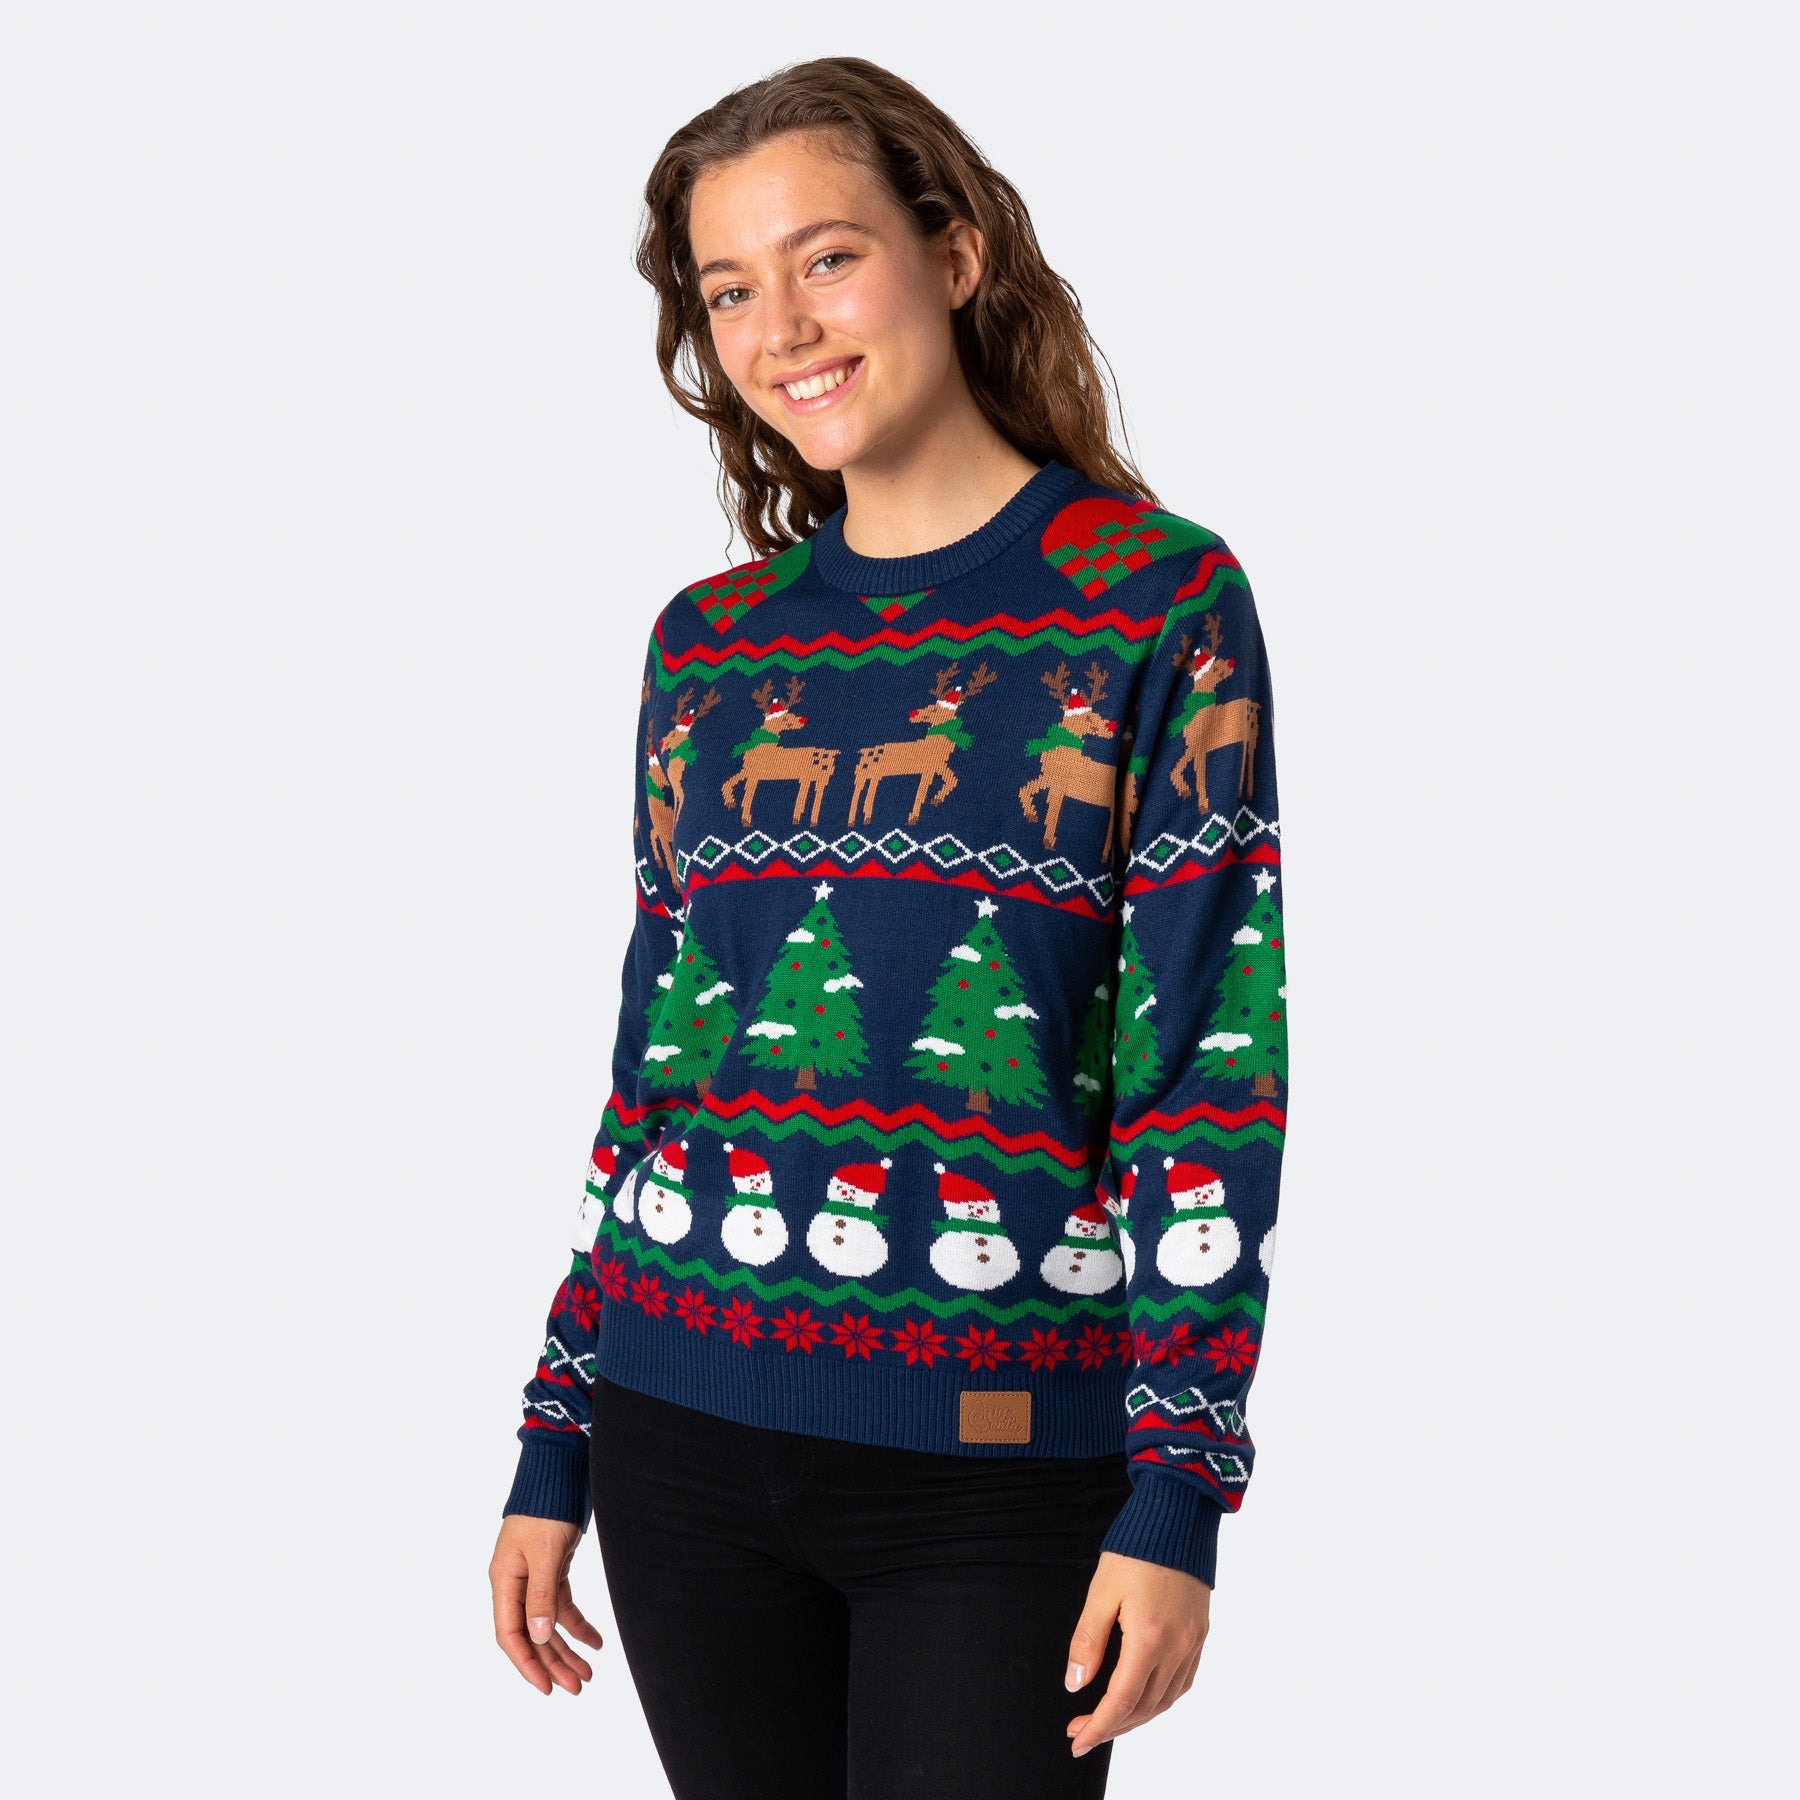 Women's Christmas Sweaters  Women's Ugly Christmas Sweaters